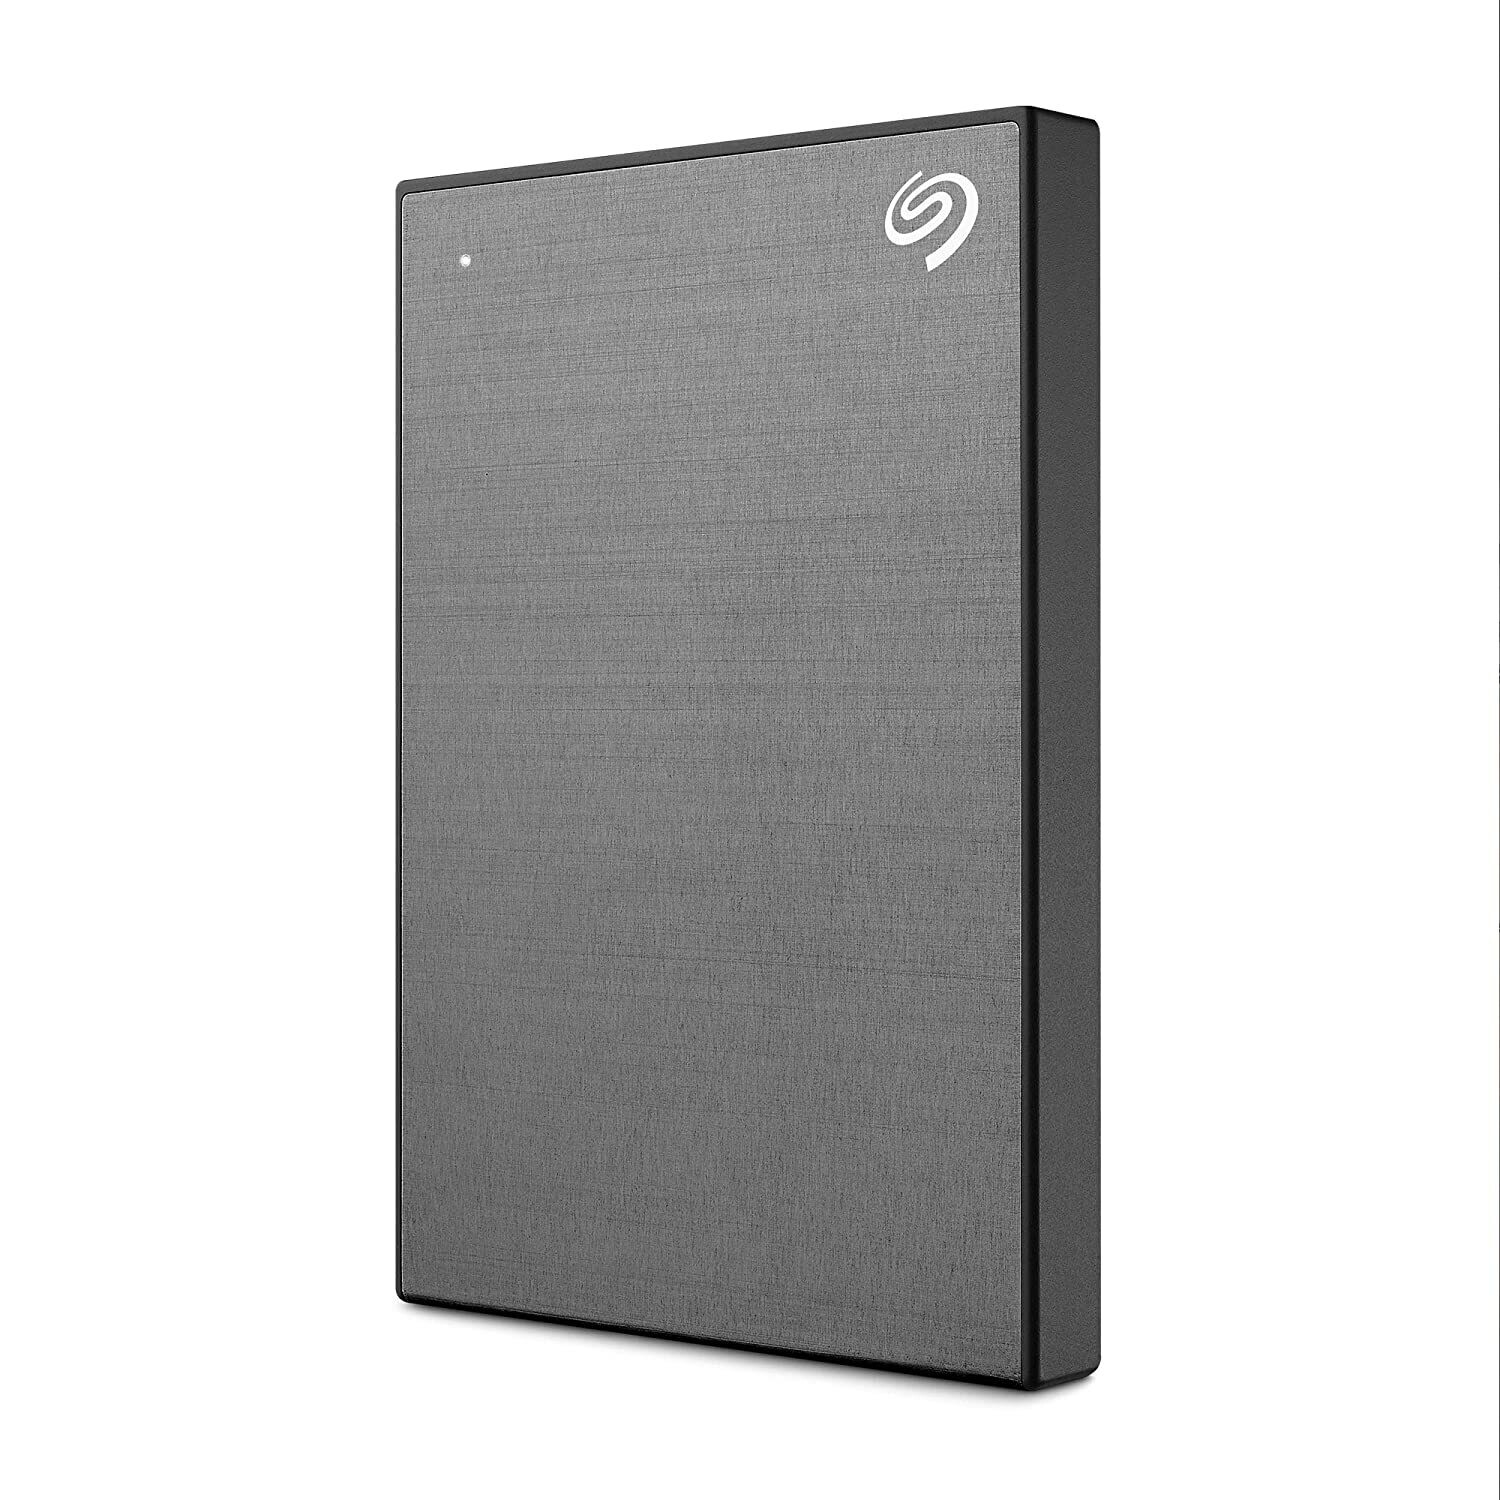 Seagate One Touch 1TB External HDD with Password Protection – Space Gray